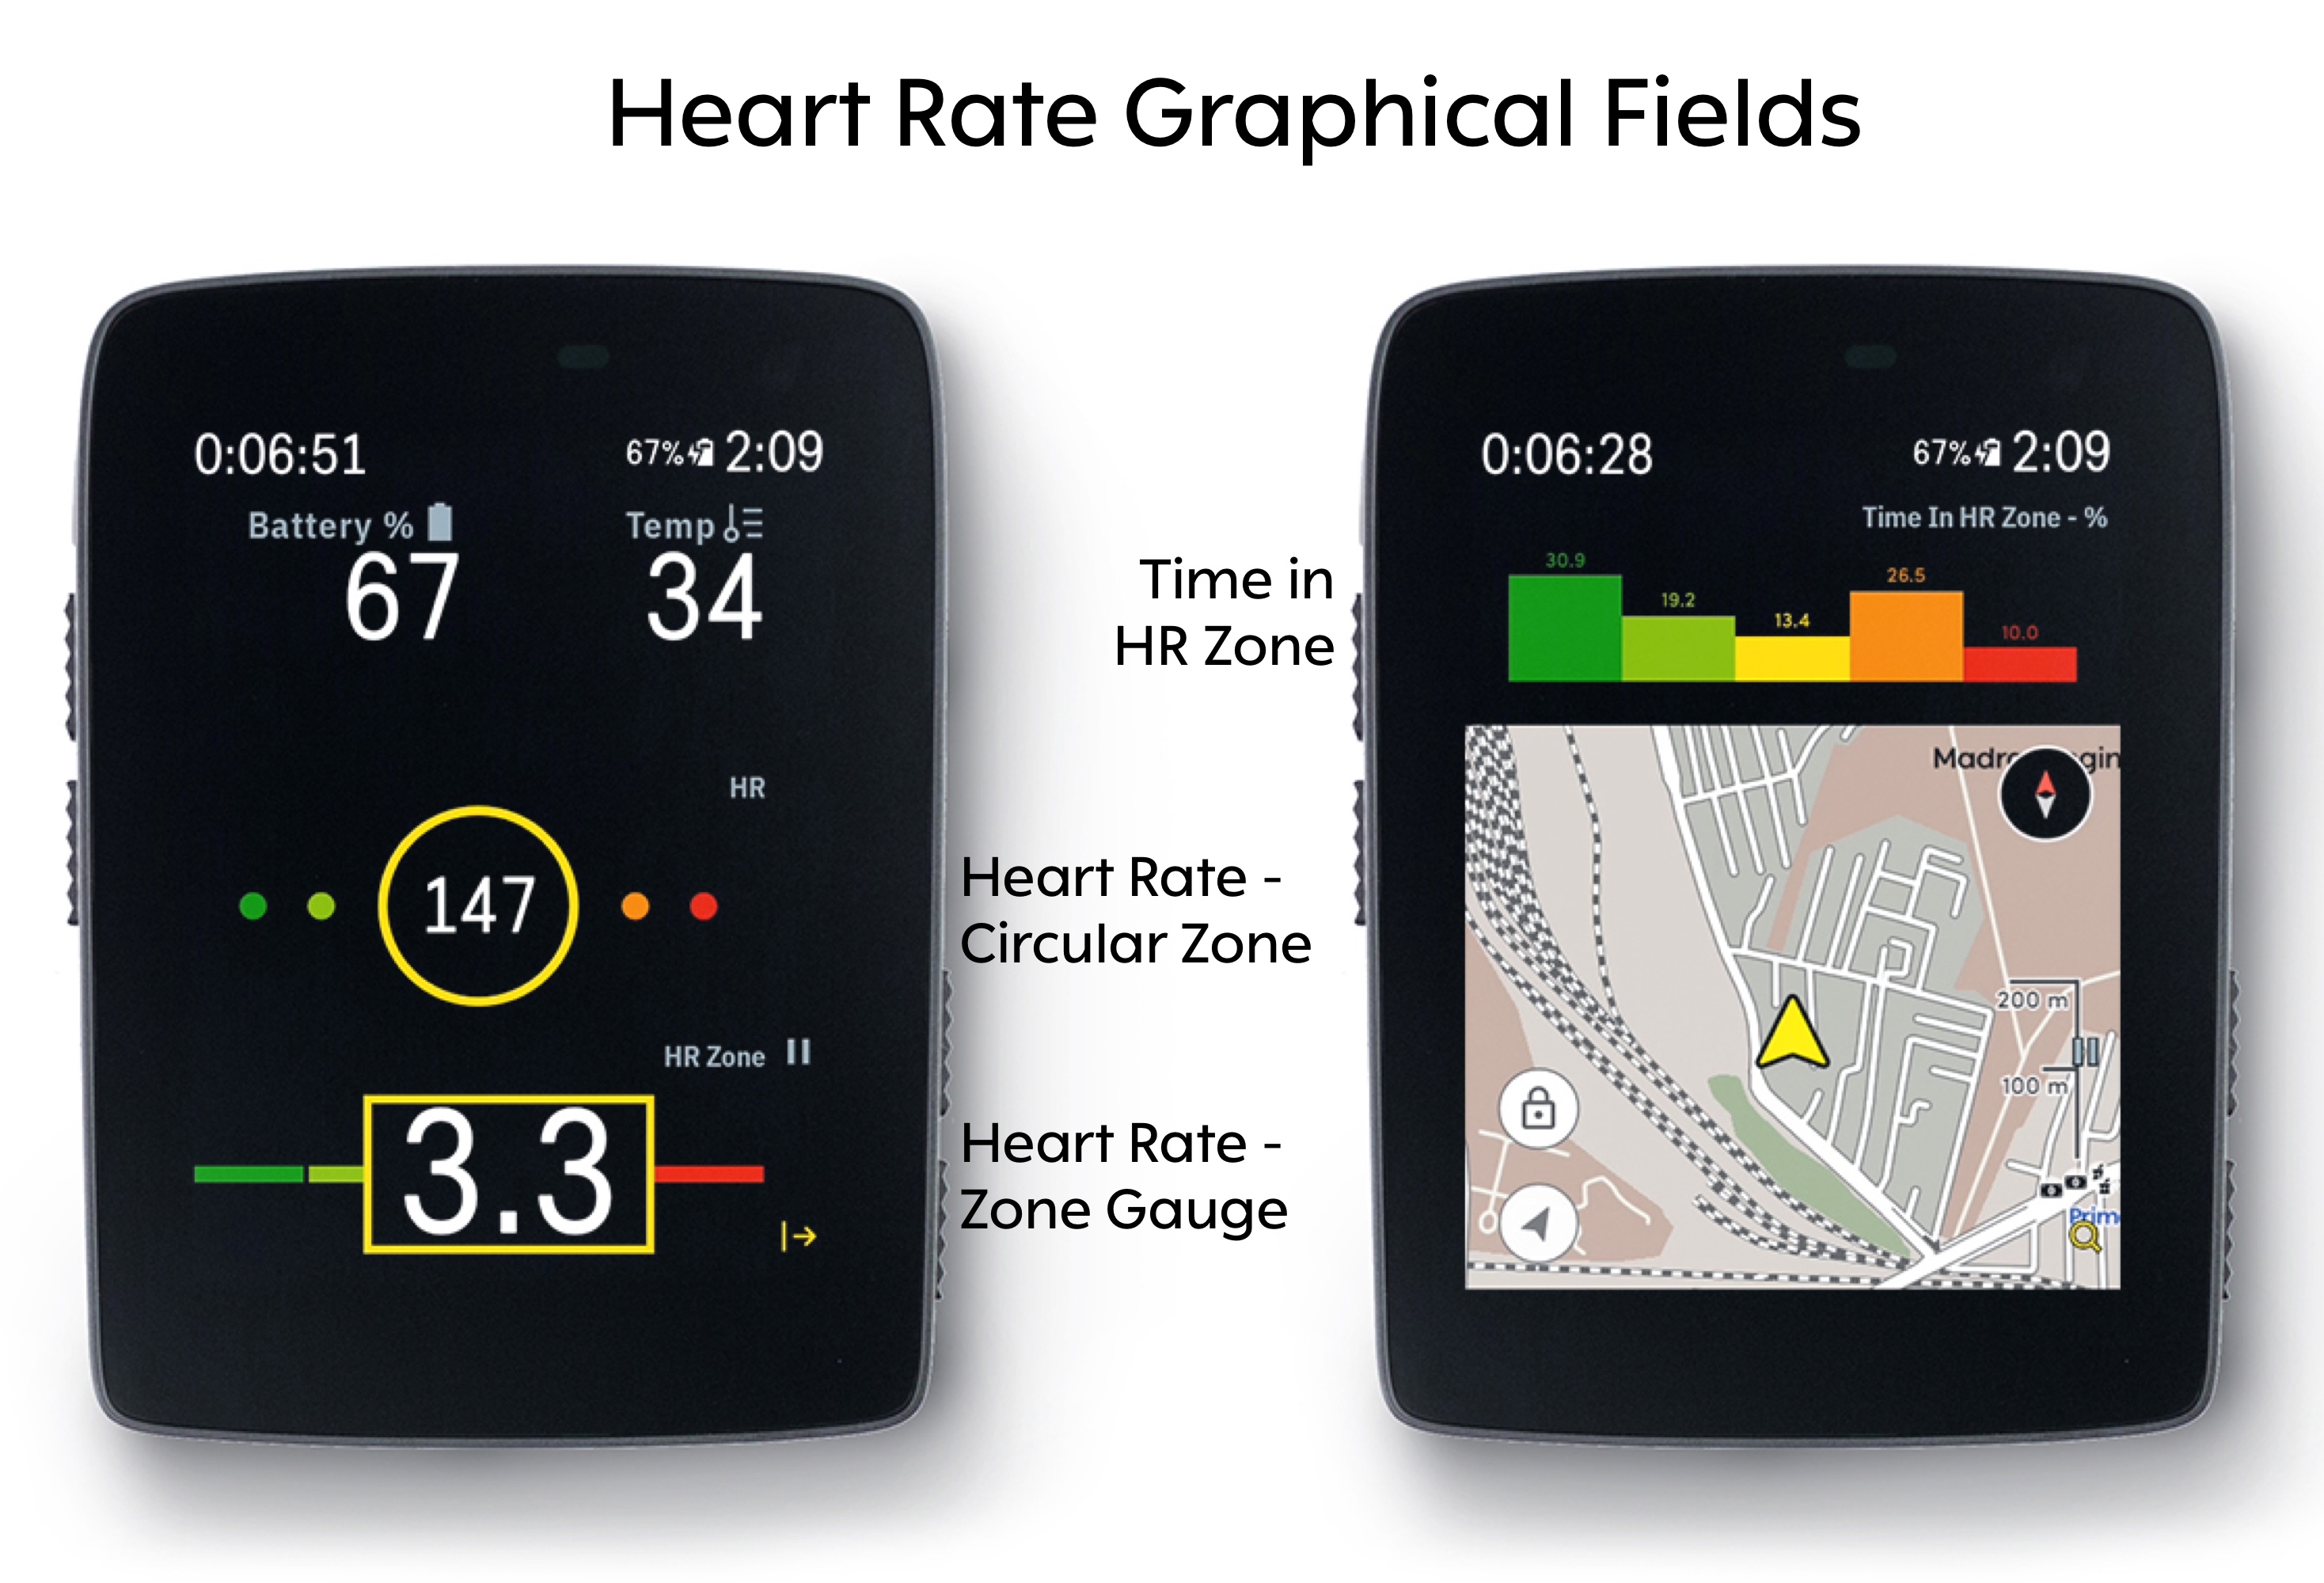 K1_-_Heart_Rate_Graphical_Fields.jpg